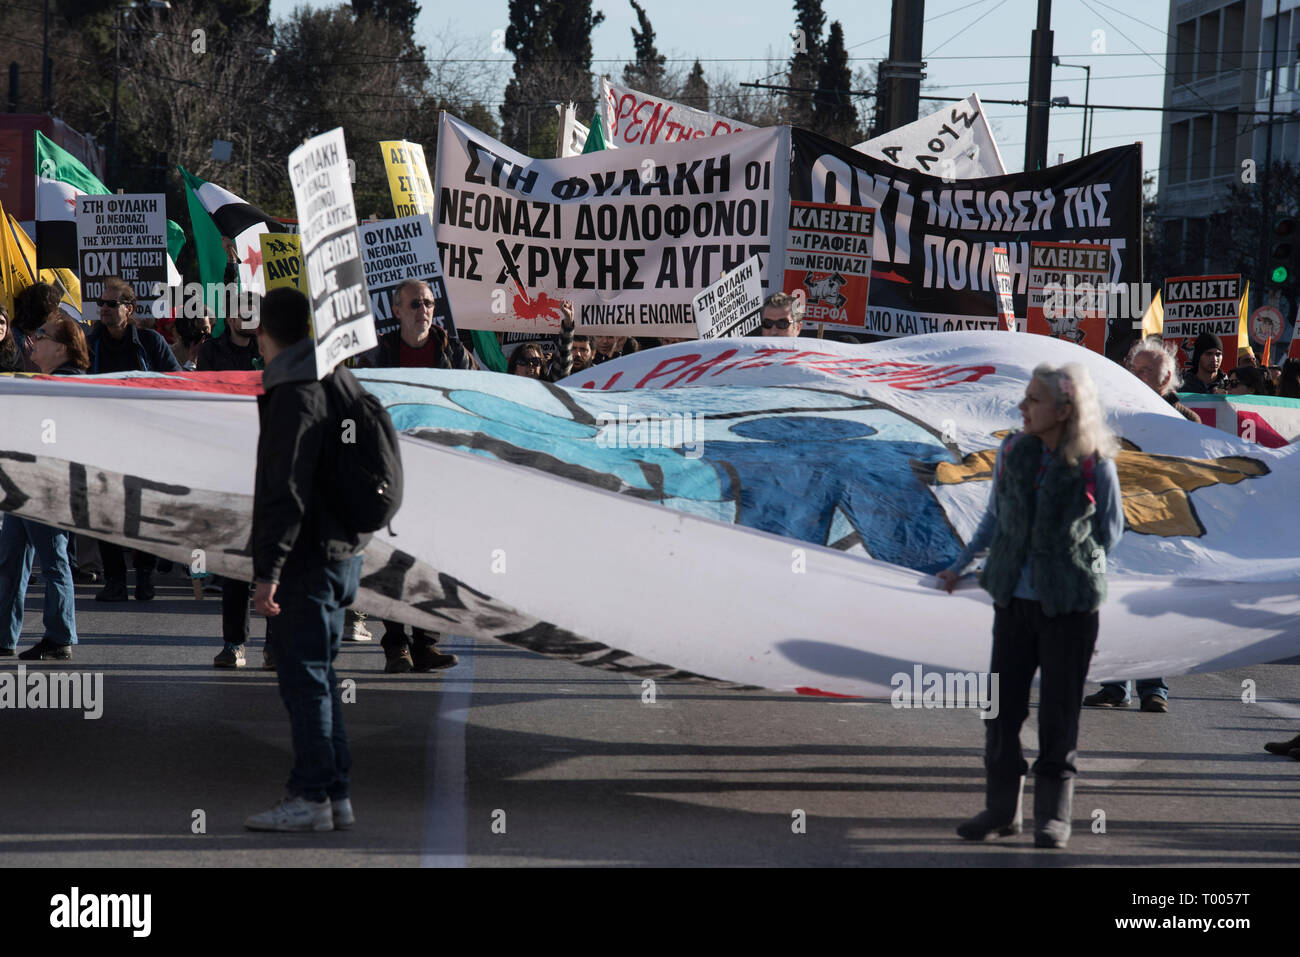 Athens, Greece. 16th March 2019. Migrants and refugees hold placards and shout slogans against racism and closed borders as well as against the greek neo-Nazi party Golden Dawn, currently on trial with accusations such as criminal organization, murder, possession of weapons and racist violence. Leftist and anti-racist organizations staged a rally on the occasion of the International Day against racism to demonstrate against discrimination and racist policies and behaviours. © Nikolas Georgiou / Alamy Live News Stock Photo